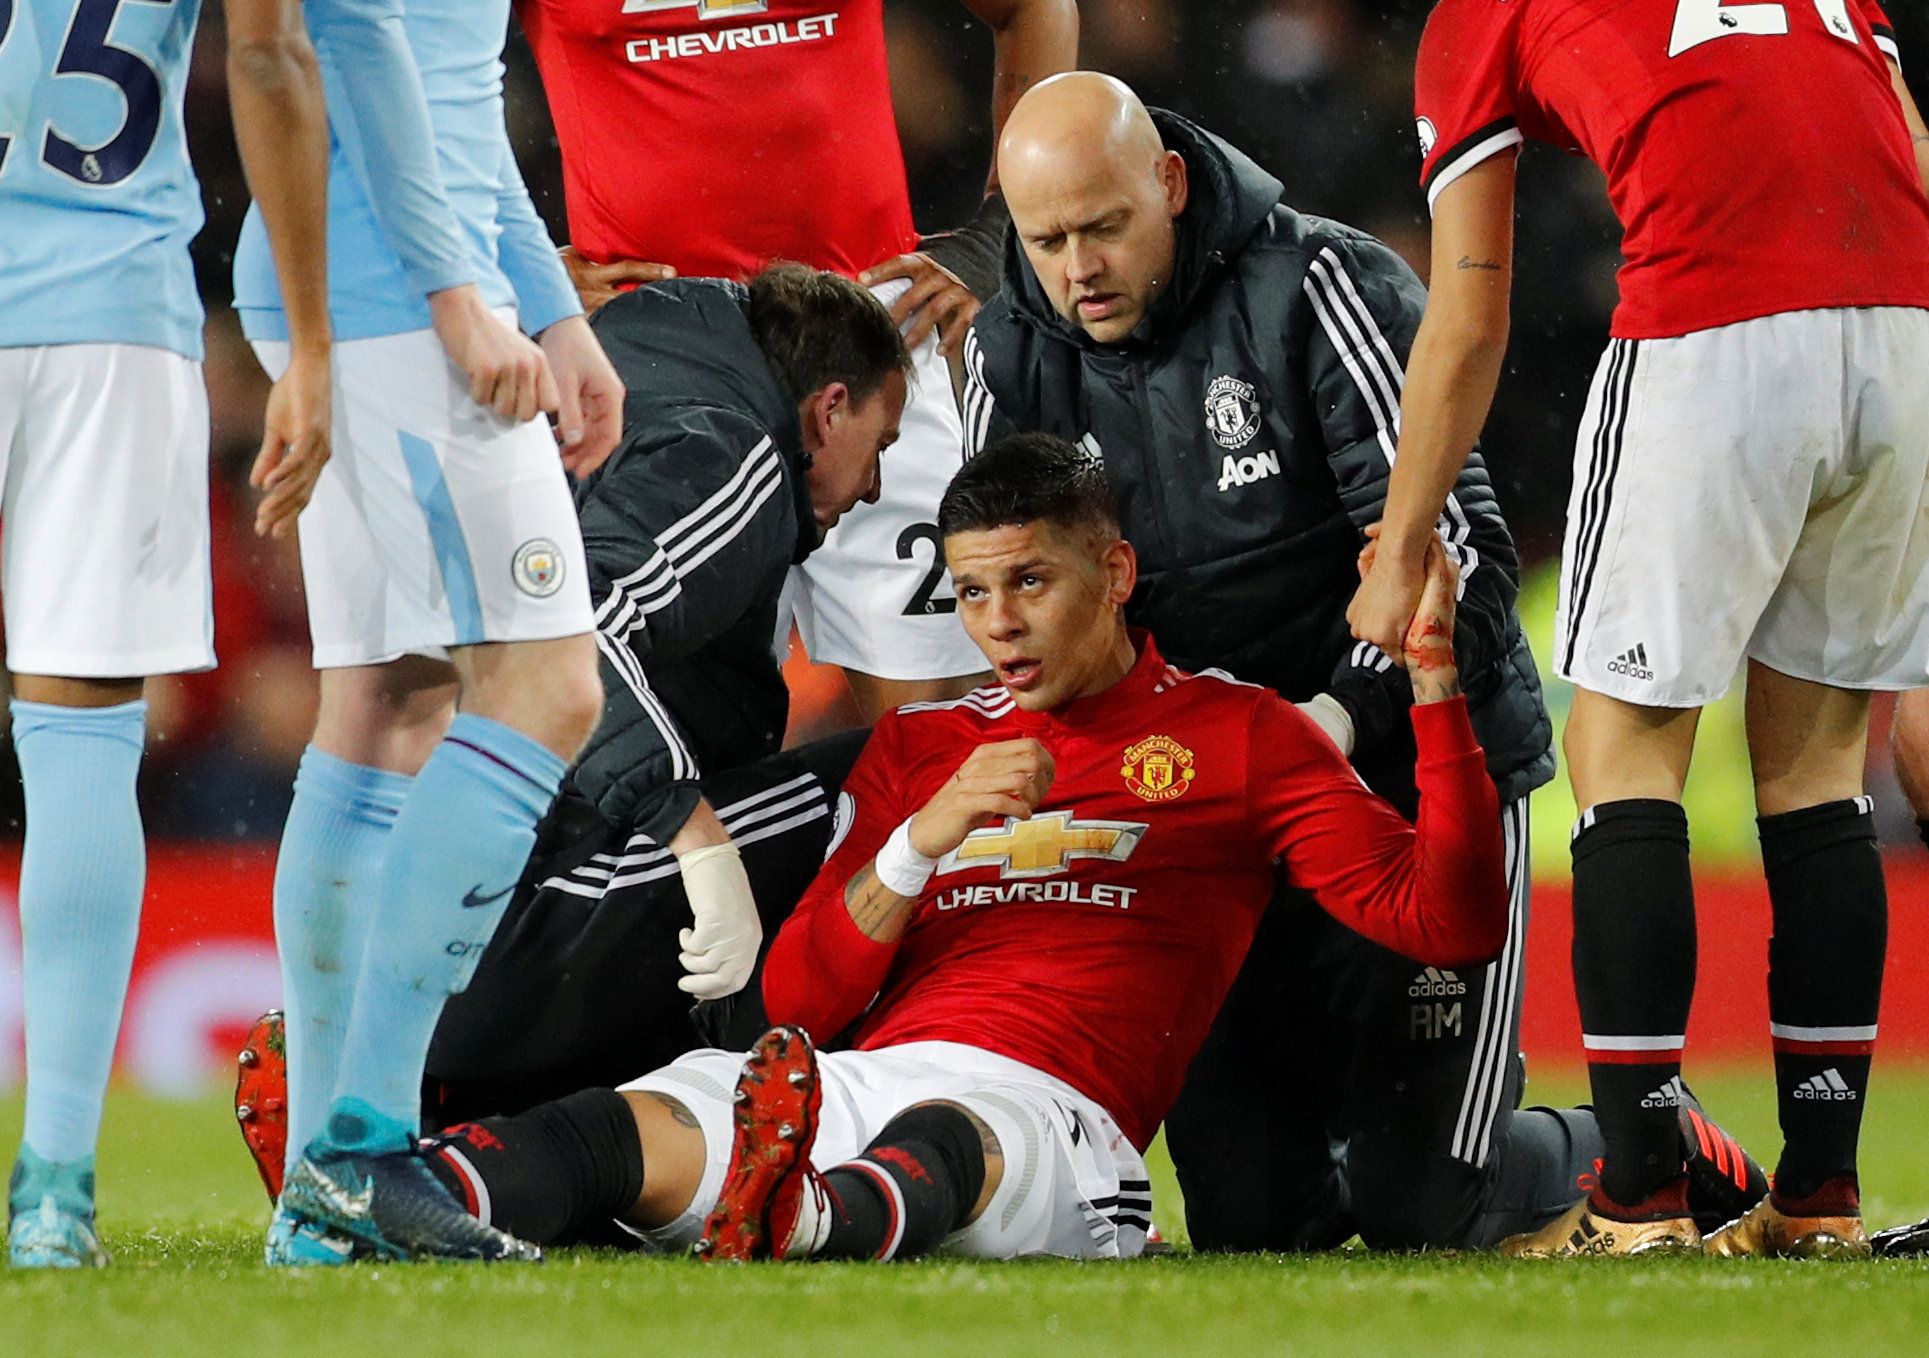 Soccer Football - Premier League - Manchester United vs Manchester City - Old Trafford, Manchester, Britain - December 10, 2017   Manchester United's Marcos Rojo receives medical attention after sustaining an injury                 REUTERS/Darren Staples    EDITORIAL USE ONLY. No use with unauthorized audio, video, data, fixture lists, club/league logos or "live" services. Online in-match use limited to 75 images, no video emulation. No use in betting, games or single club/league/player publicat